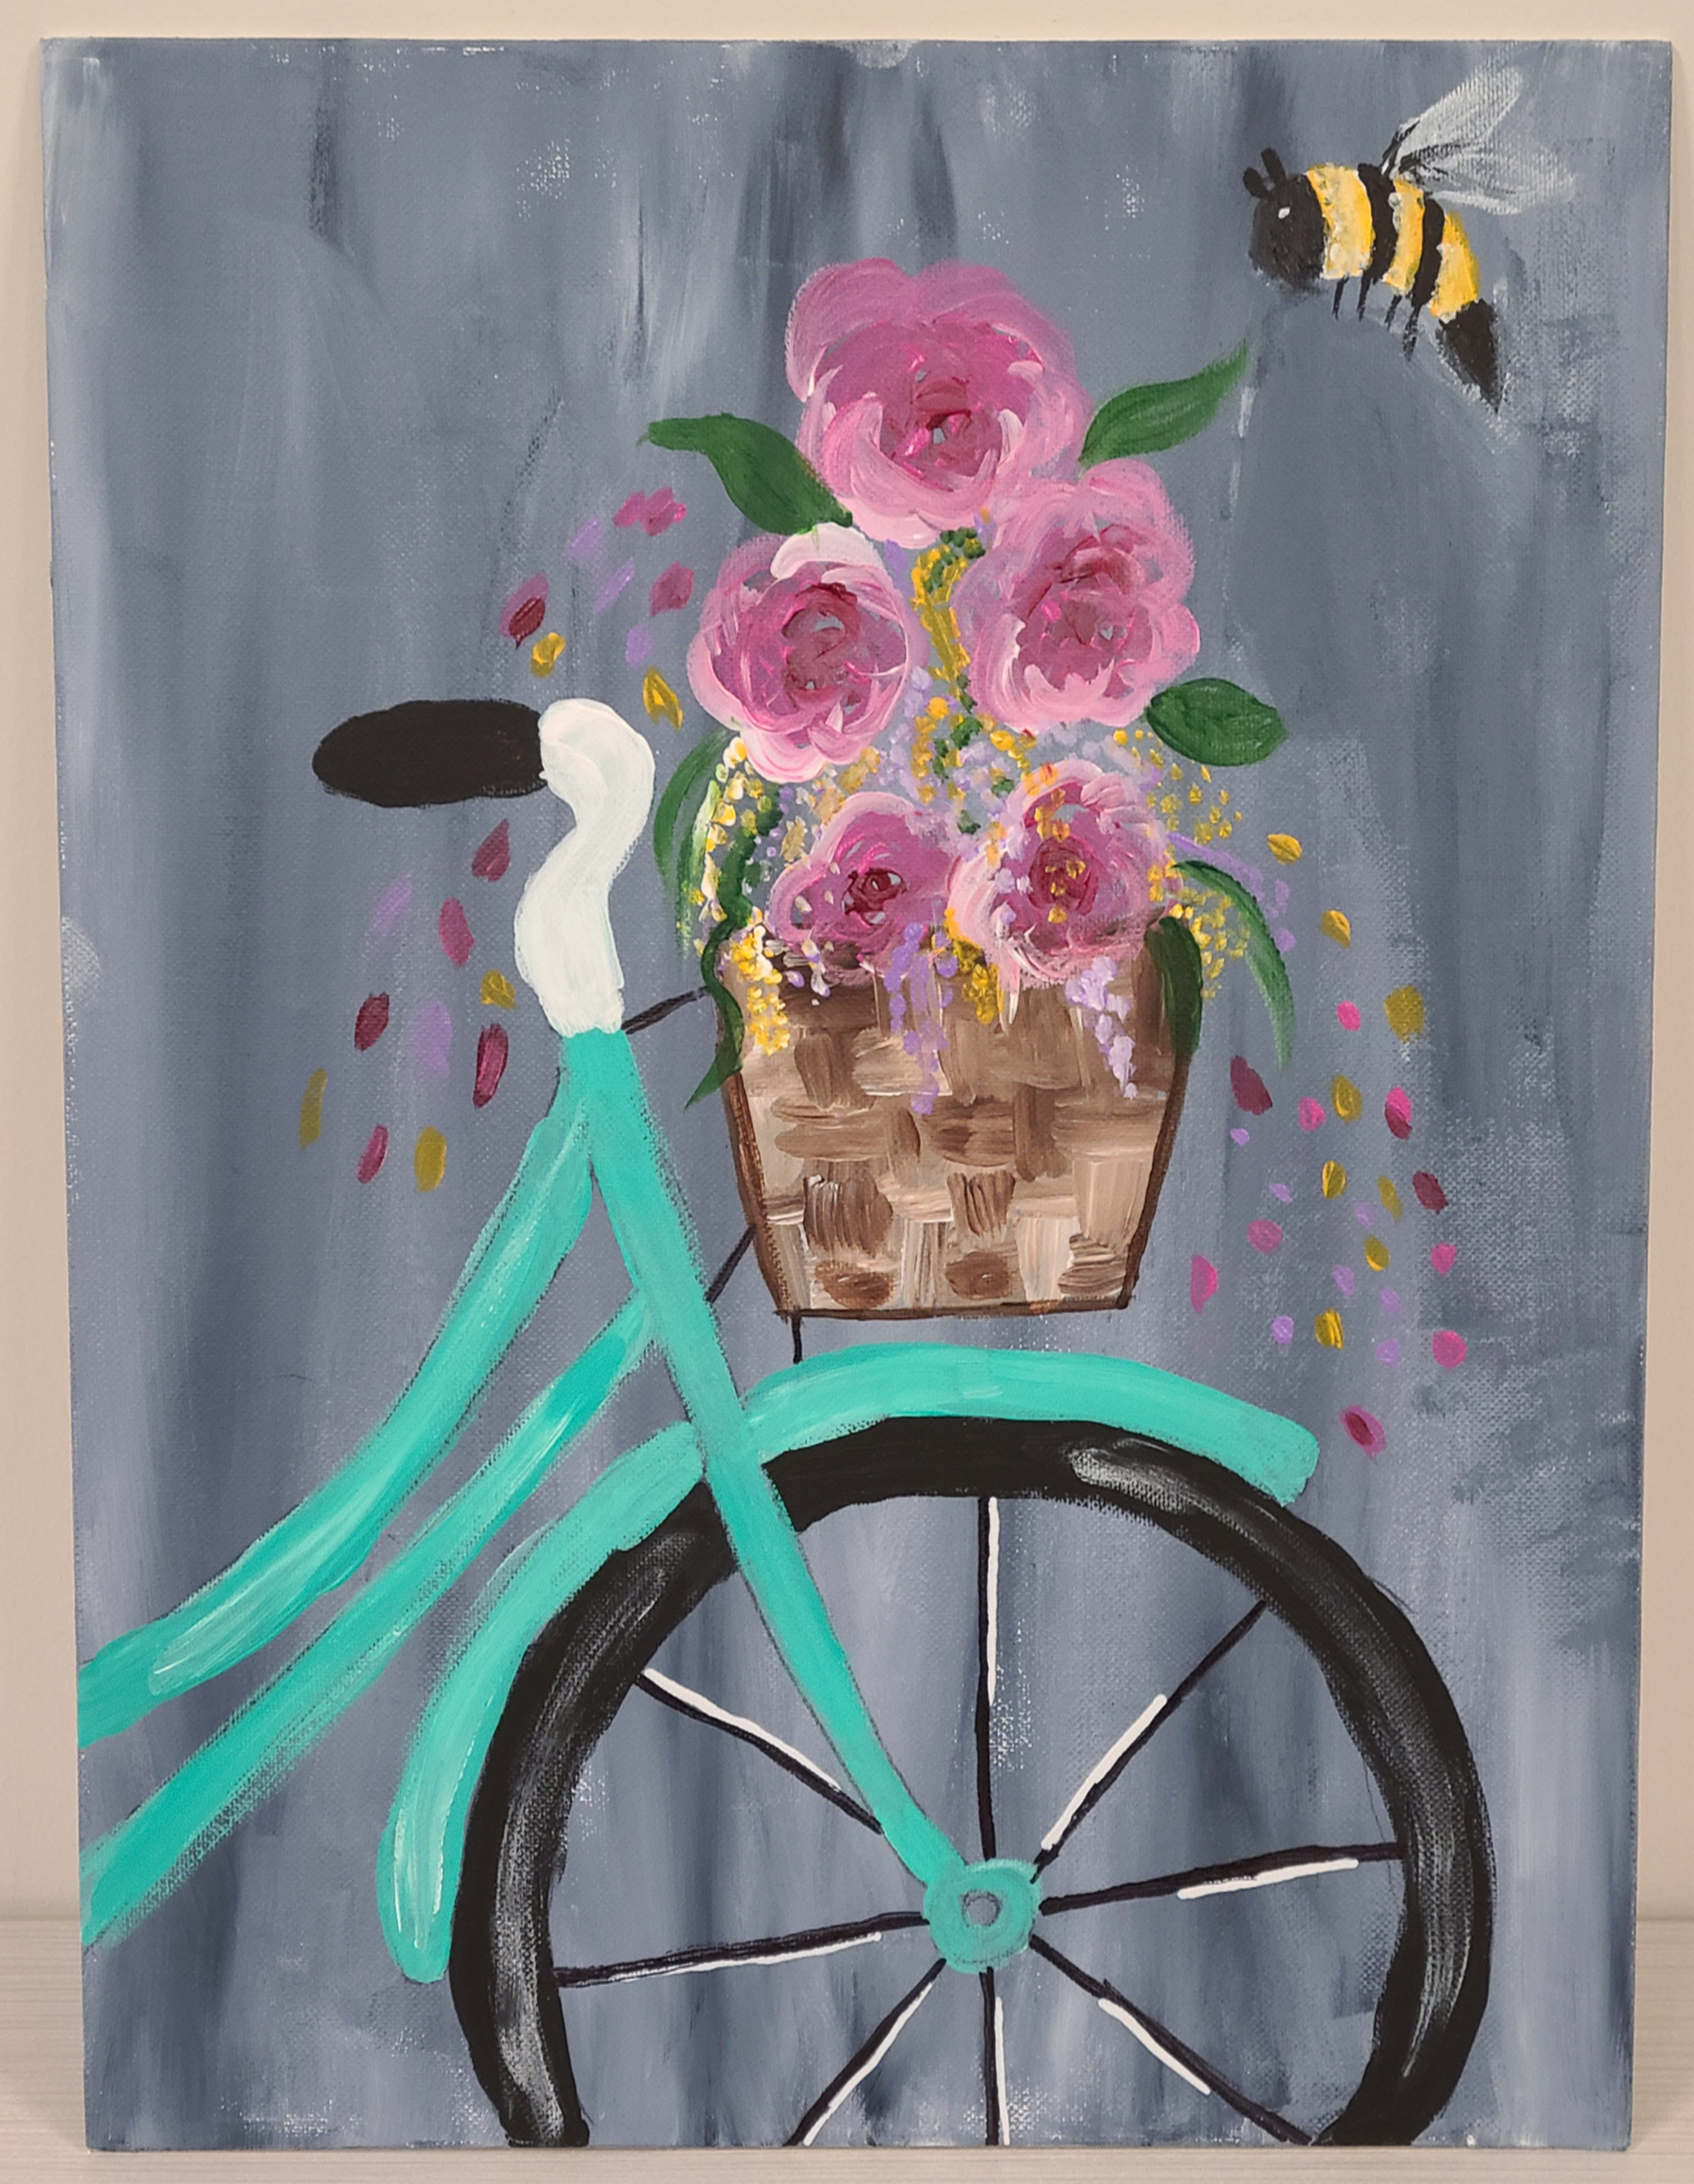 Teal bicycle with brown woven basket with pink flowers and a bumblebee